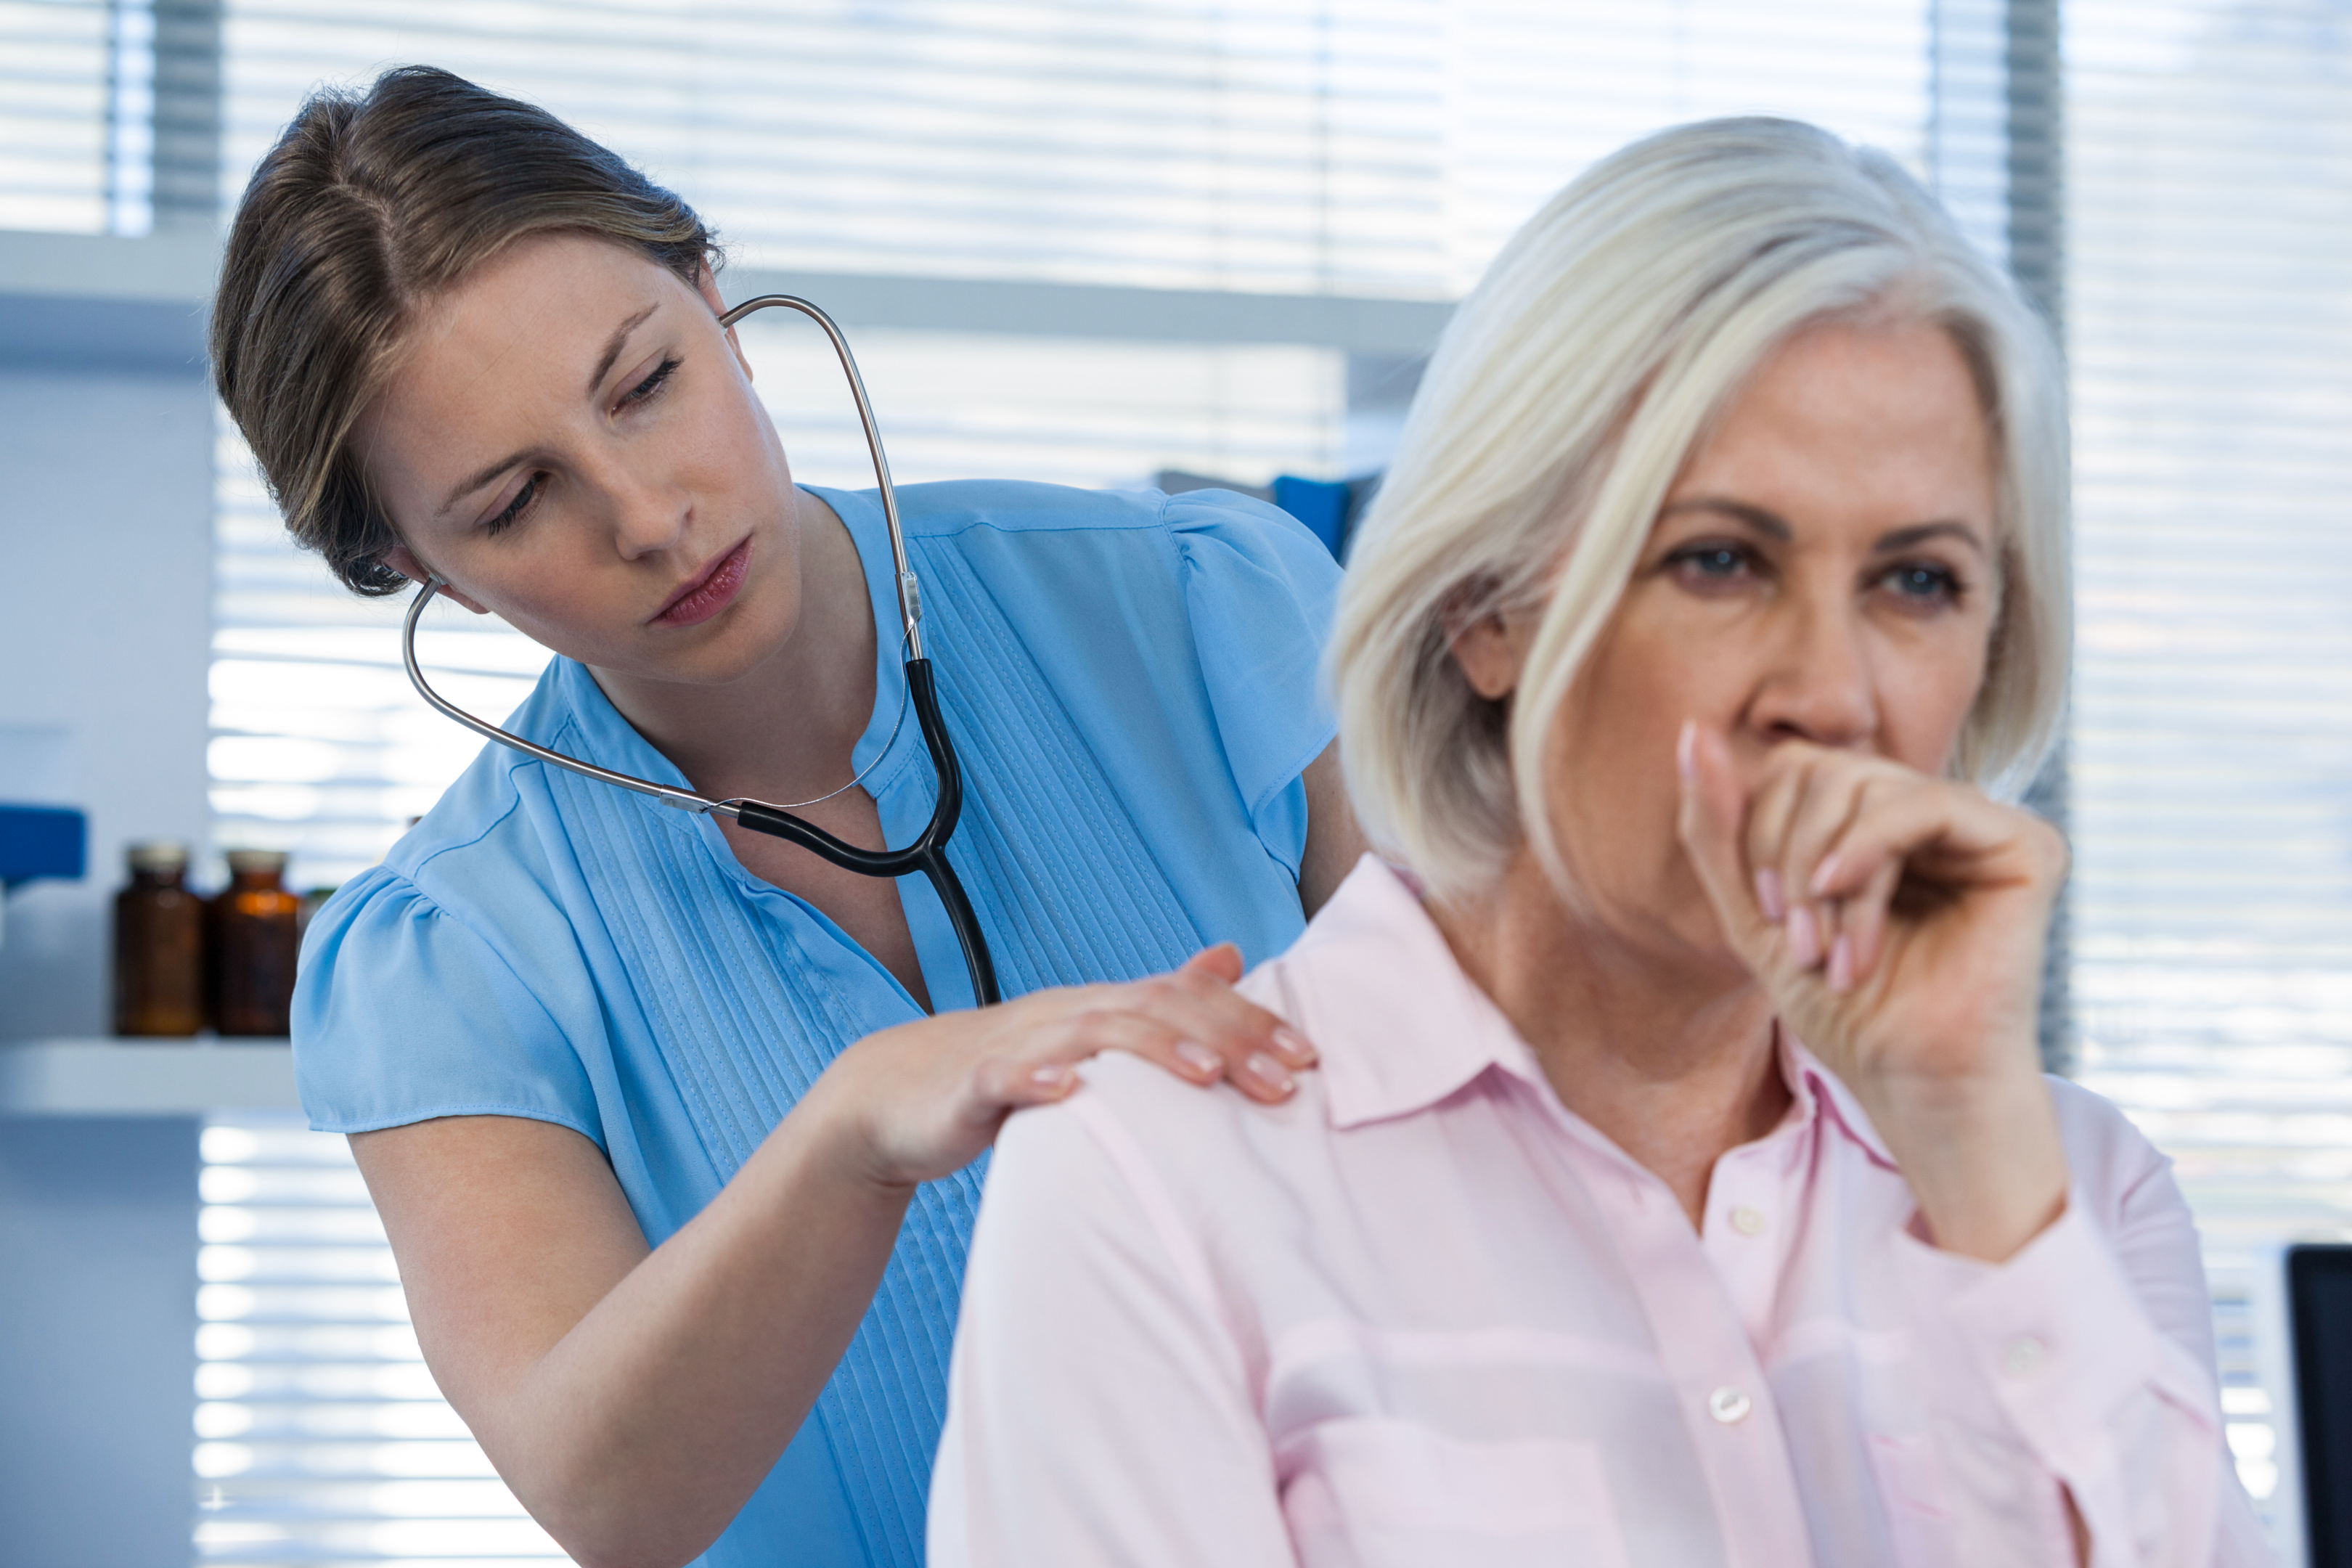 An image of a woman clearing her throat as a doctor examines her. 